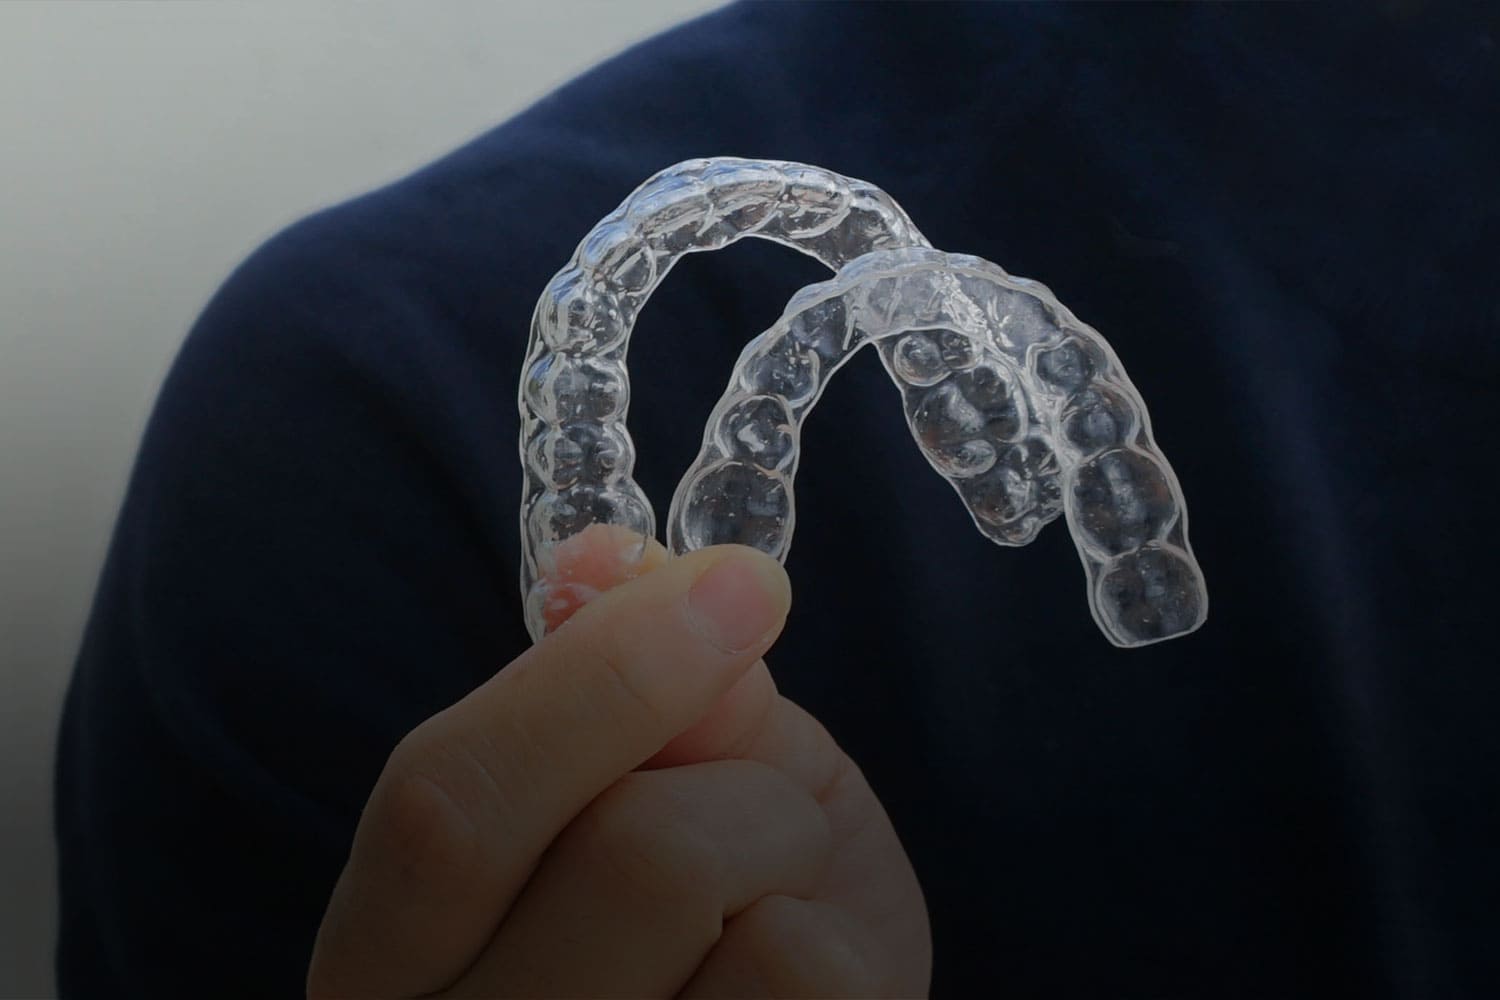 How Frequently Should I Clean My Invisalign?